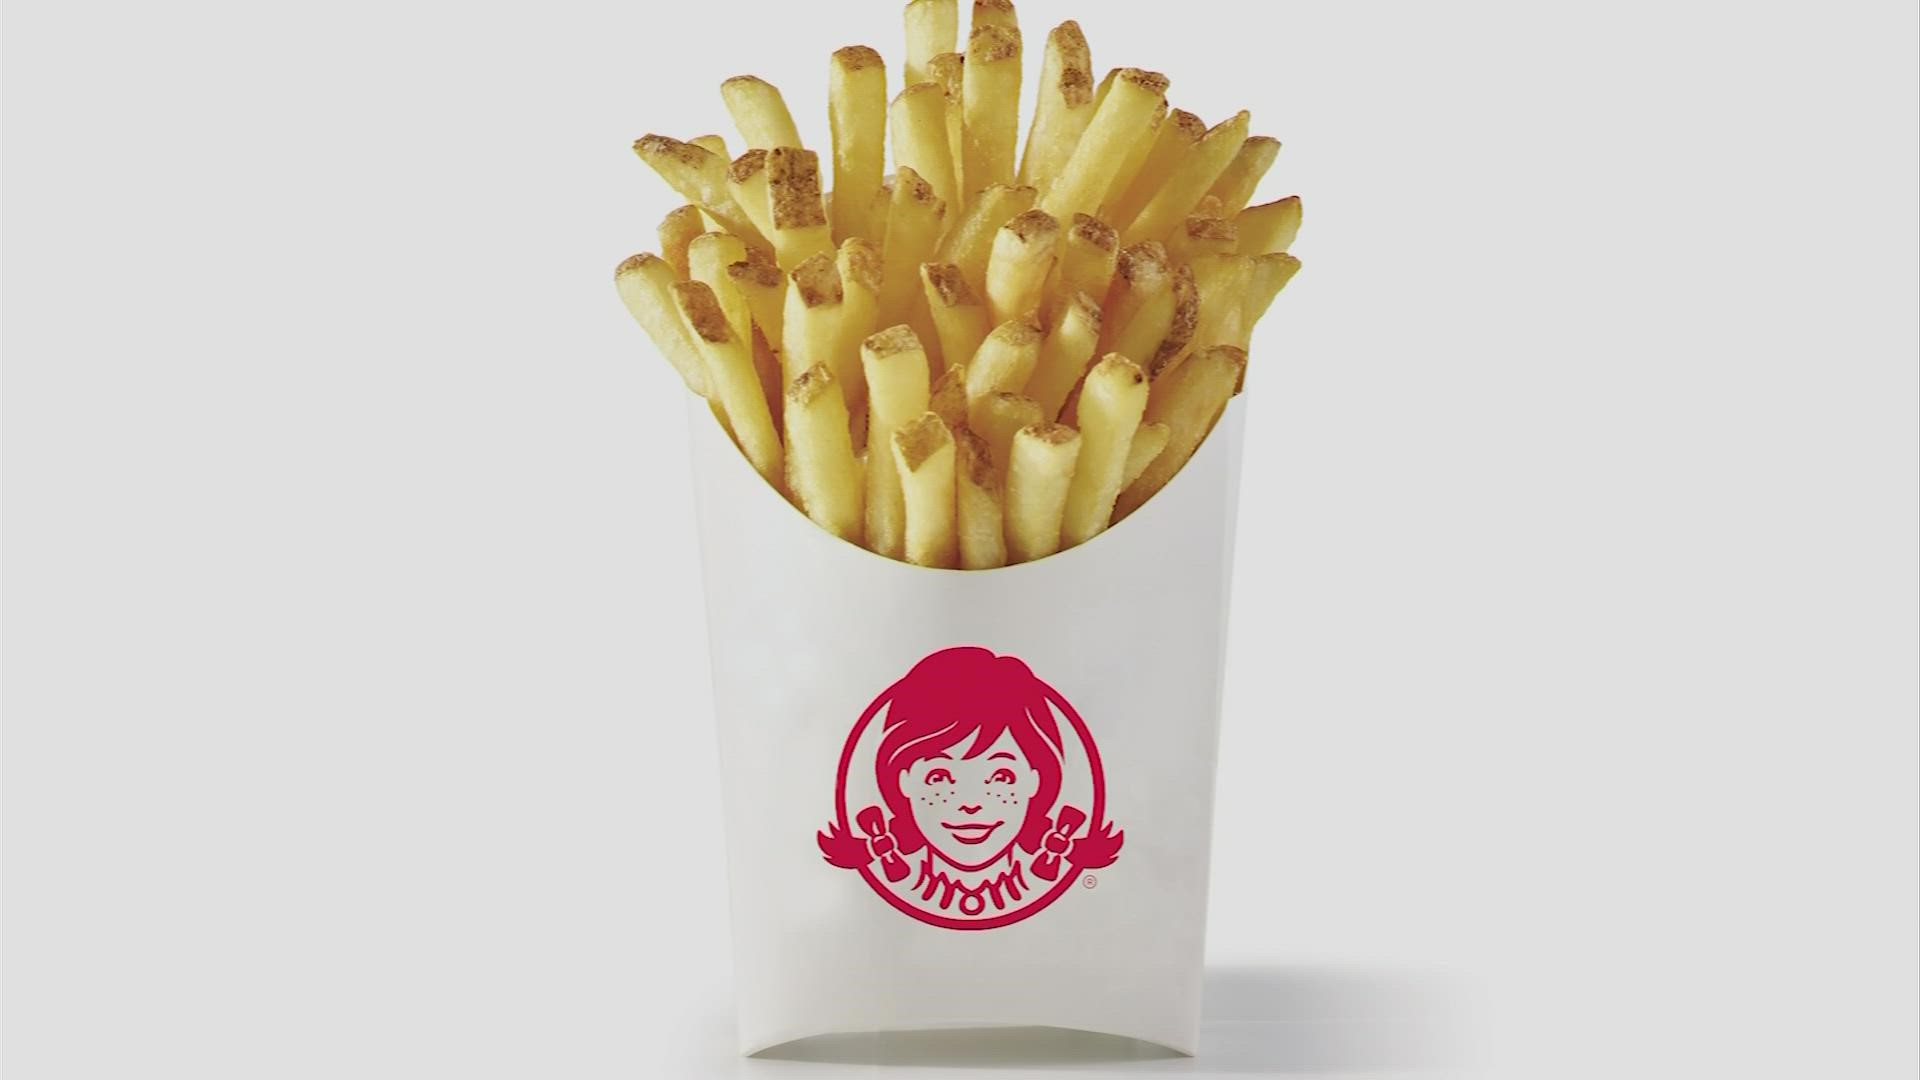 The fry will look similar to the one they have no but will taste very different.